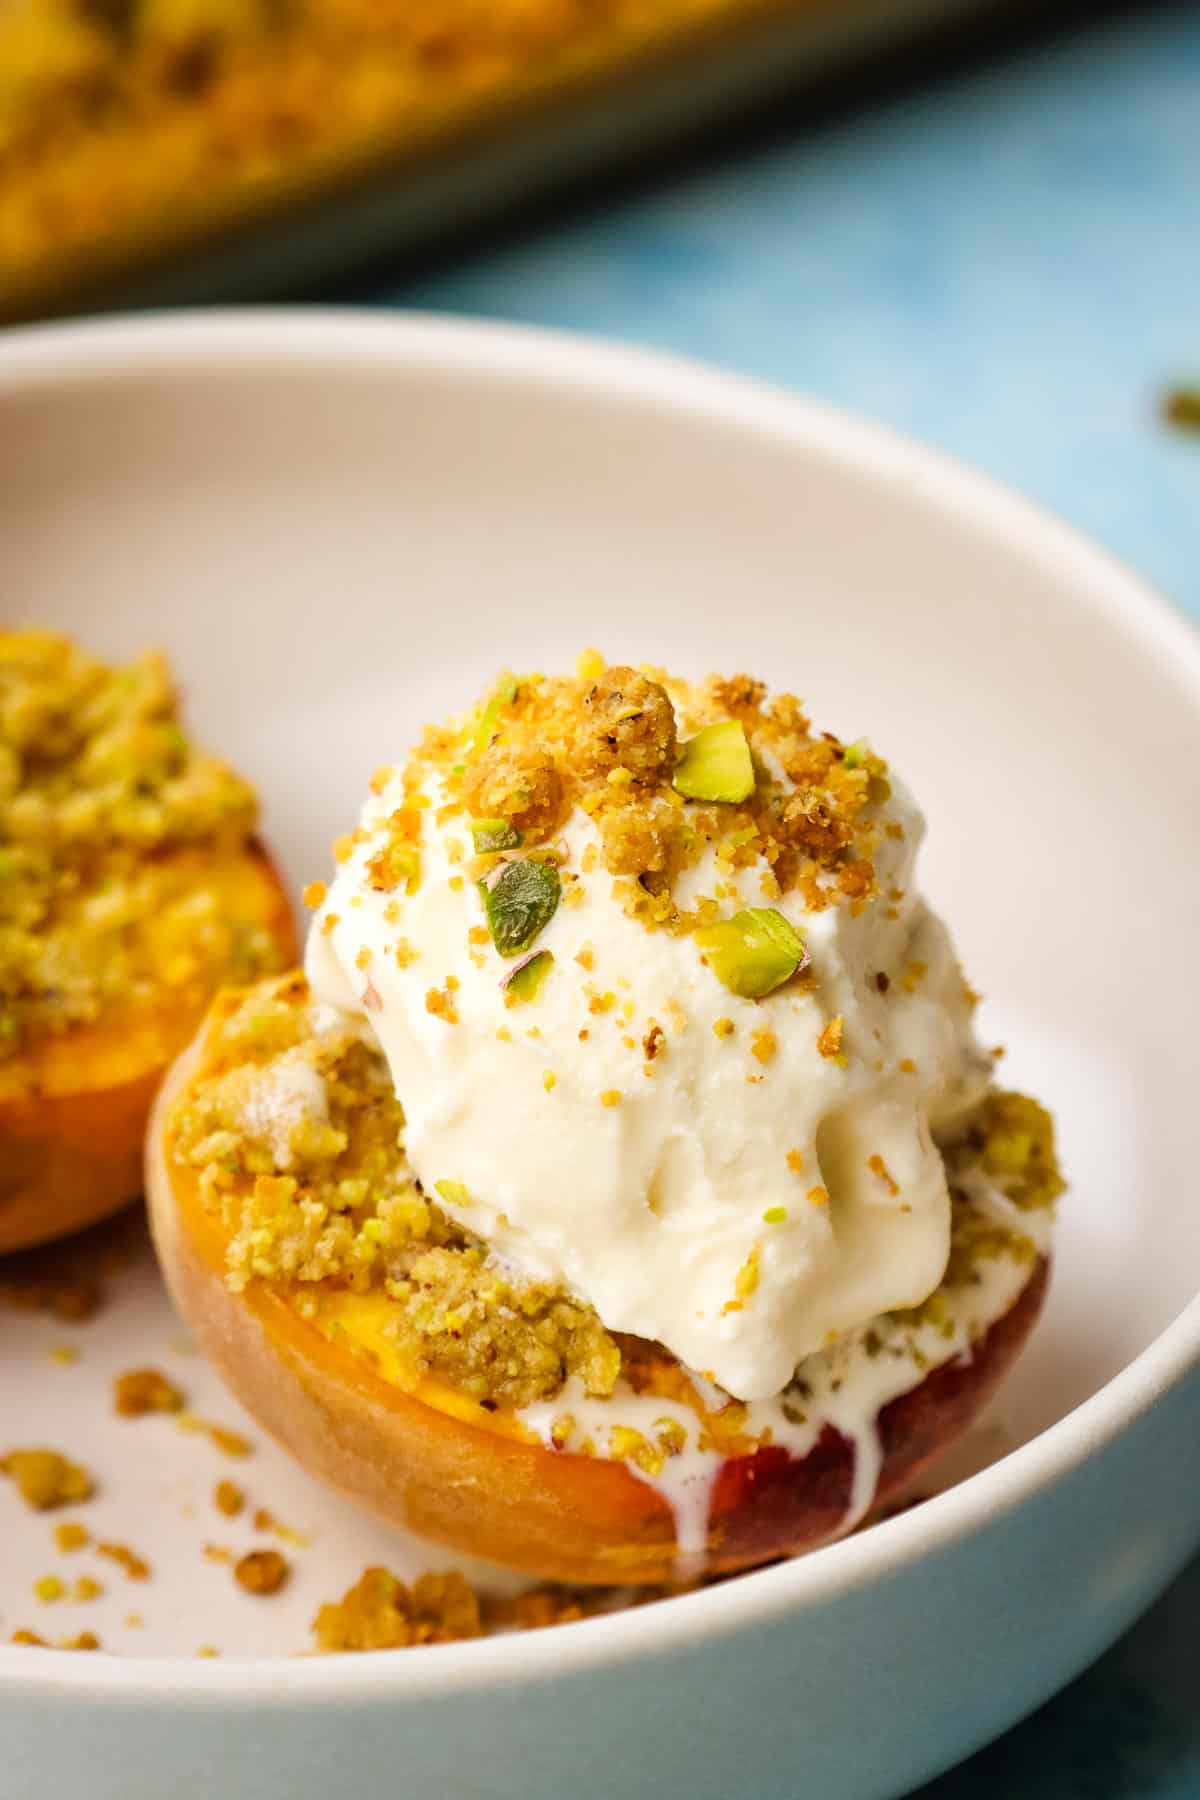 Roasted, halved peaches in a bowl with a scoop of vanilla ice cream and pistachio crumble.